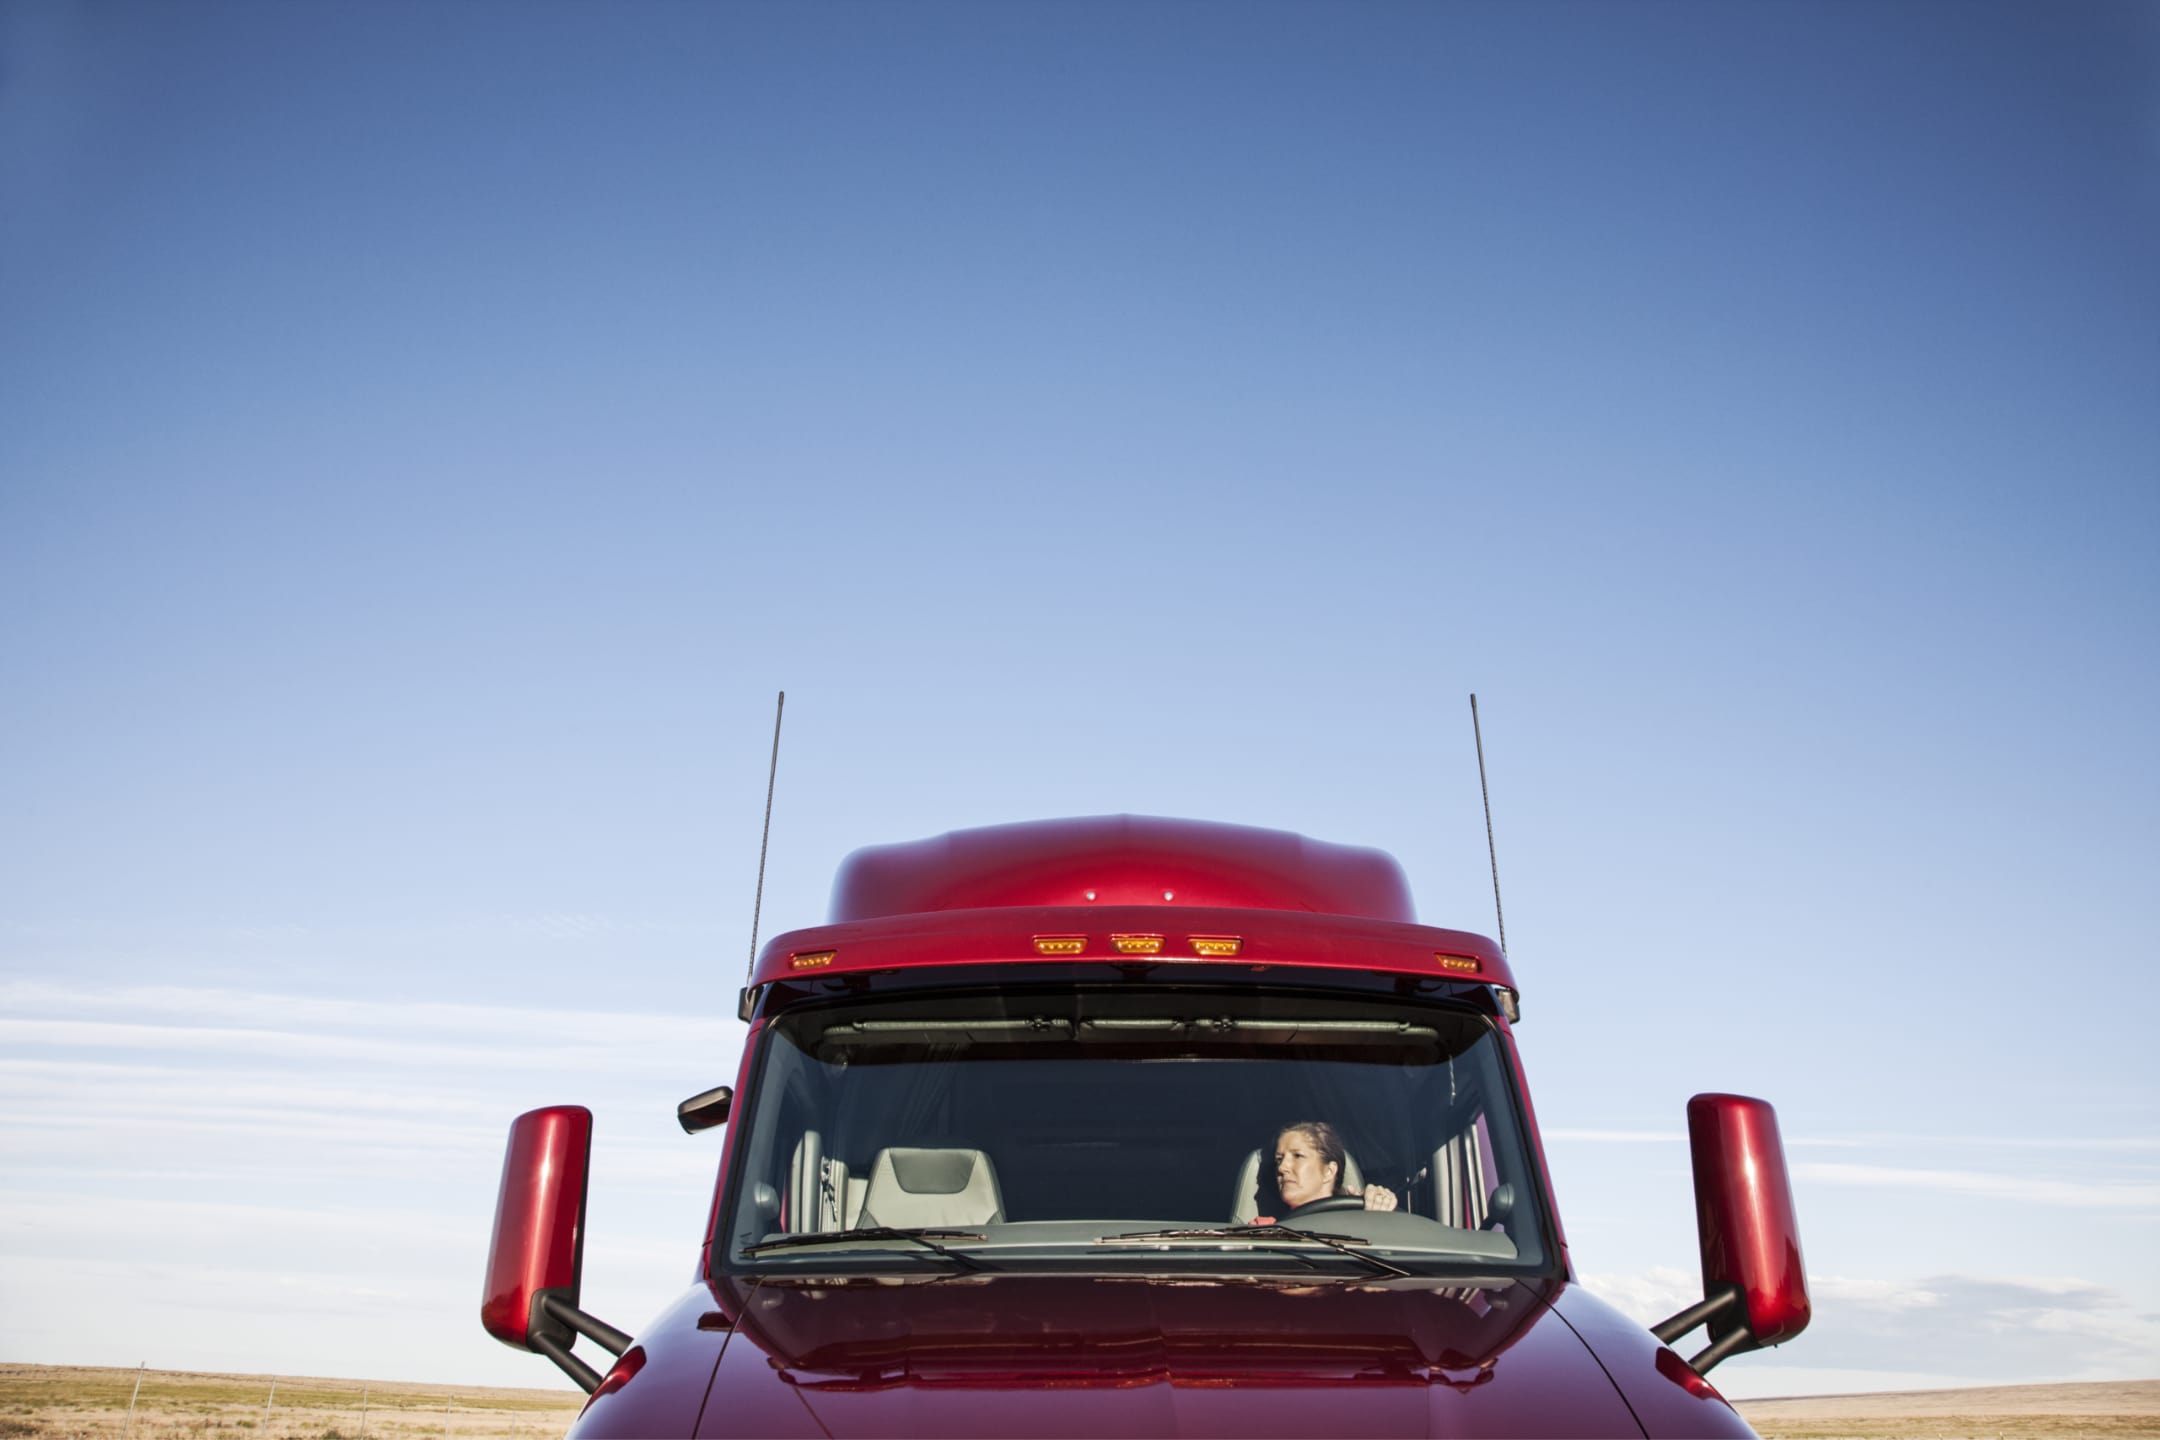 Tips and Tricks to Keep Your Semi Truck A/C Working Properly